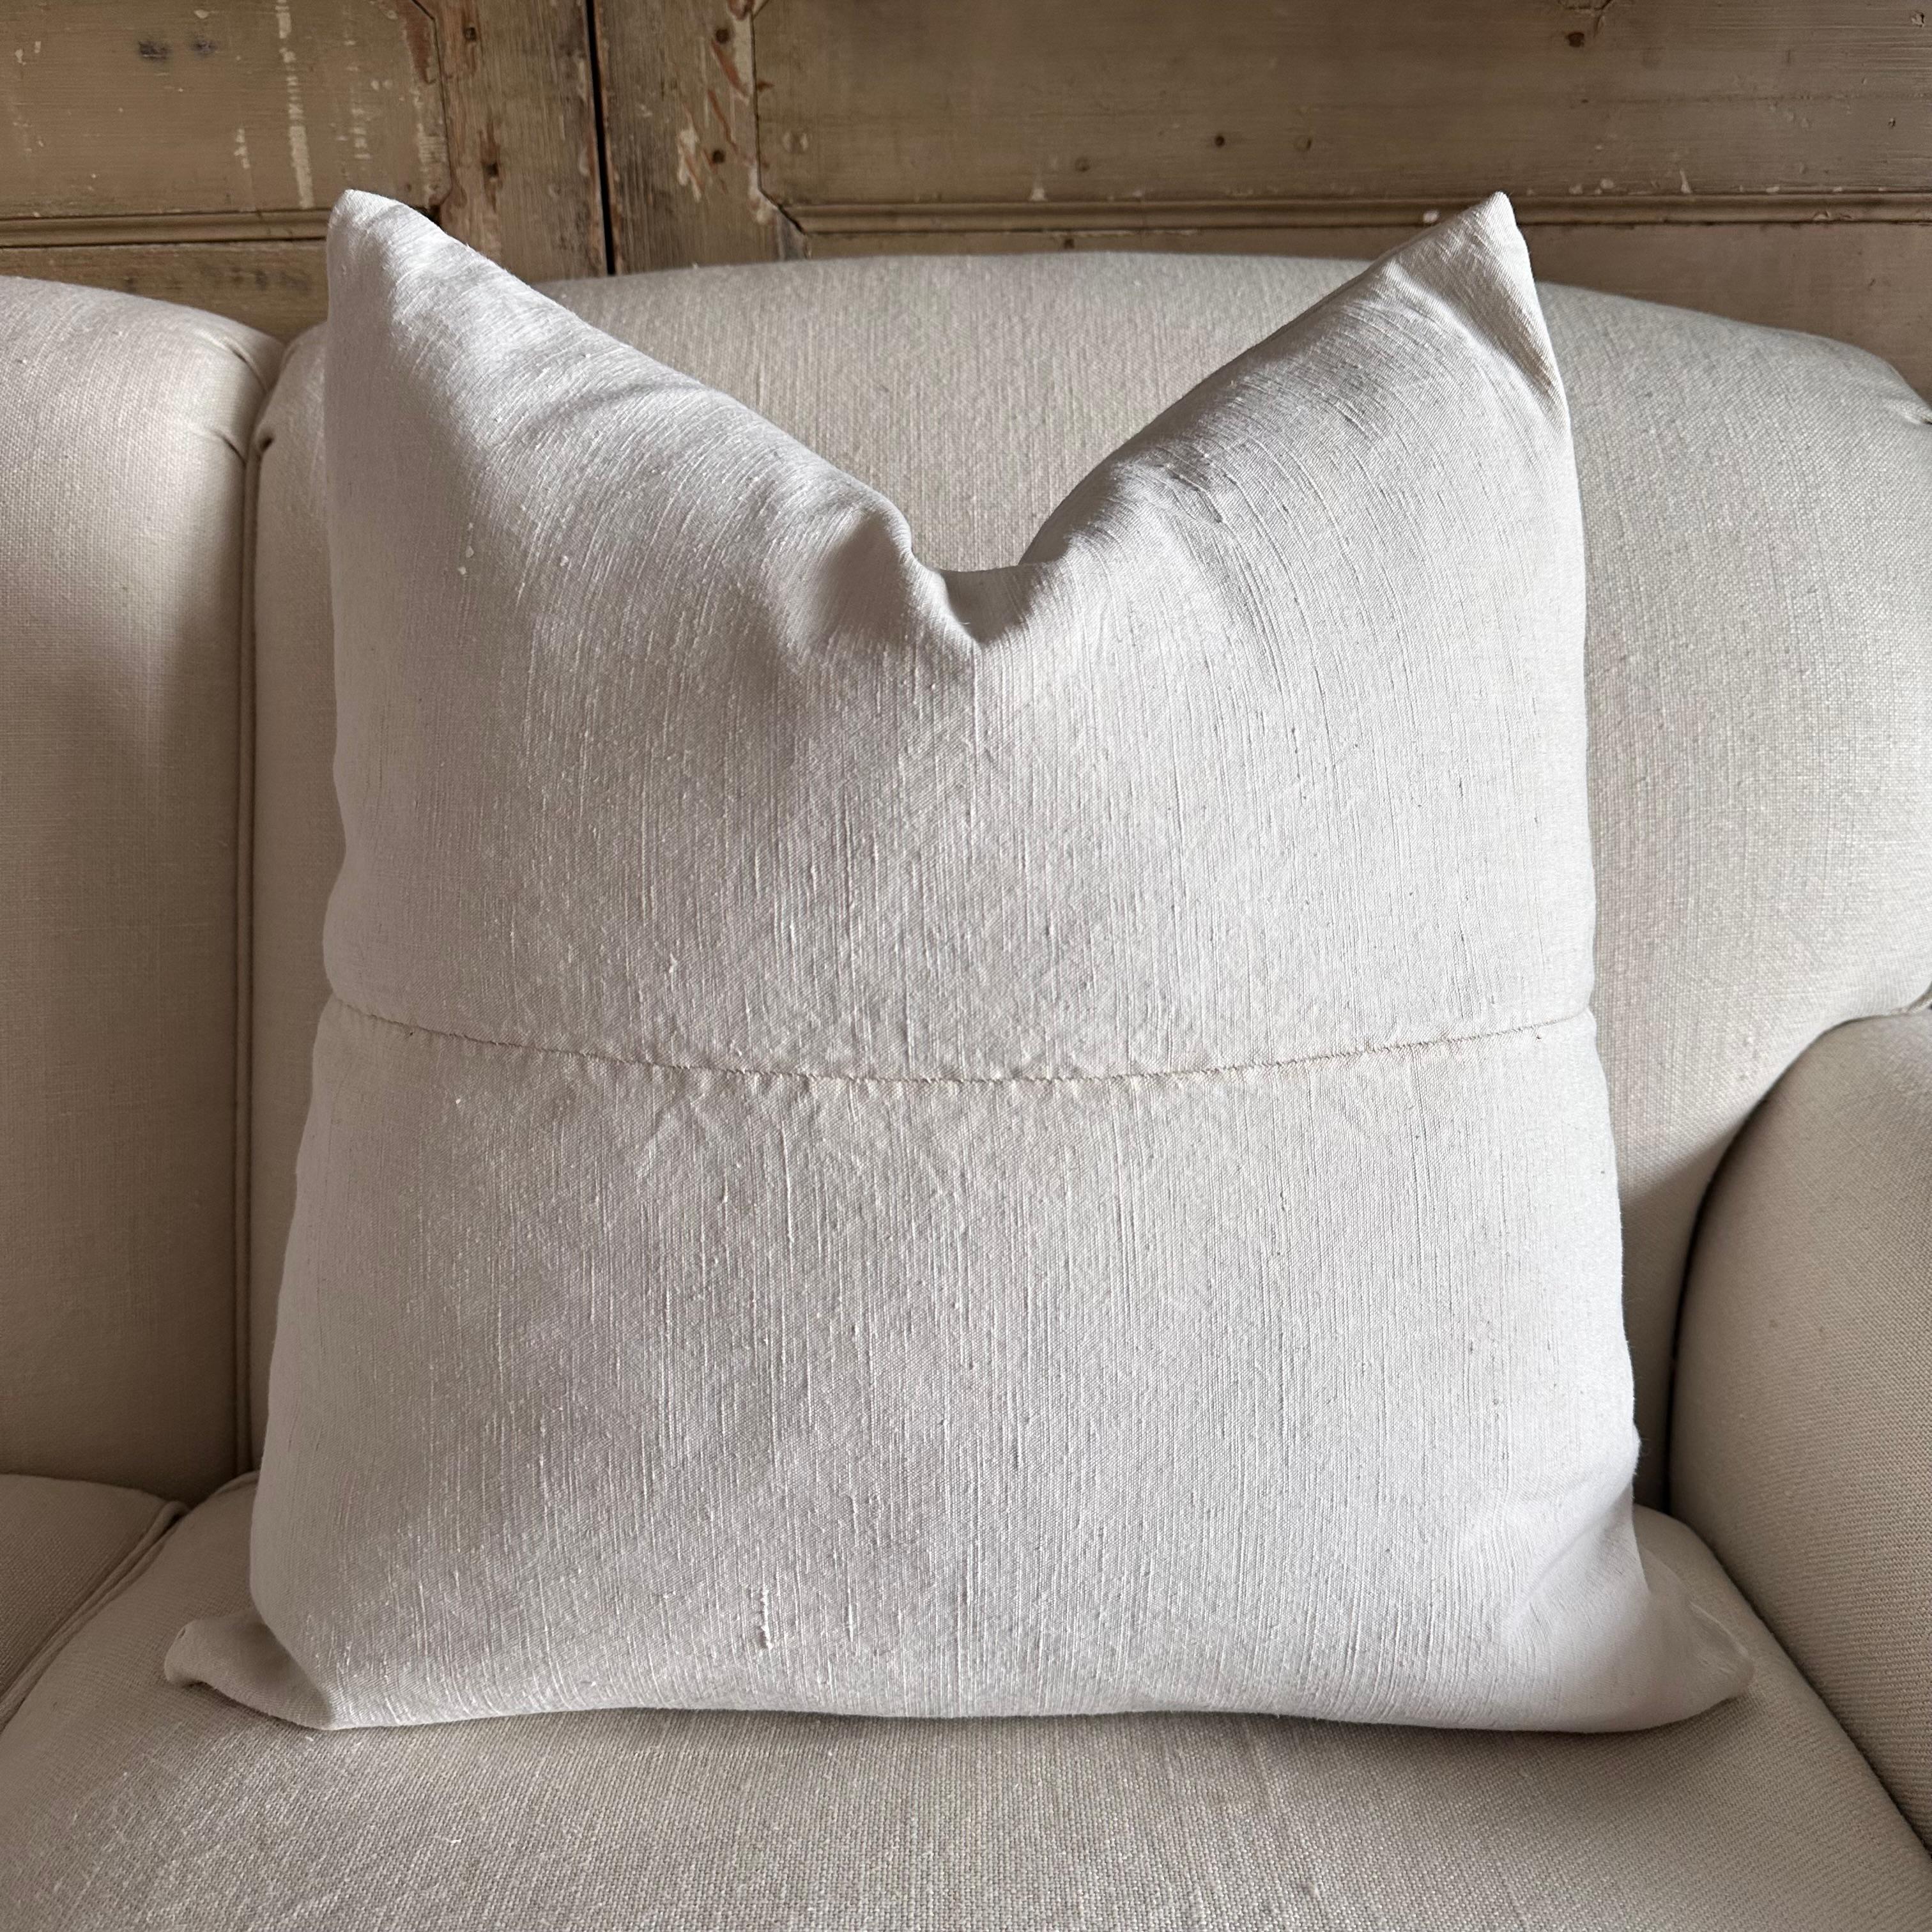 Antique French linen textile pillow with seam 0ff- white antique French linen textured grain sack pillow with original seam, backside is in a similar or same antique material.

Our linens are pre-washed ready for use. Please note that these fabrics